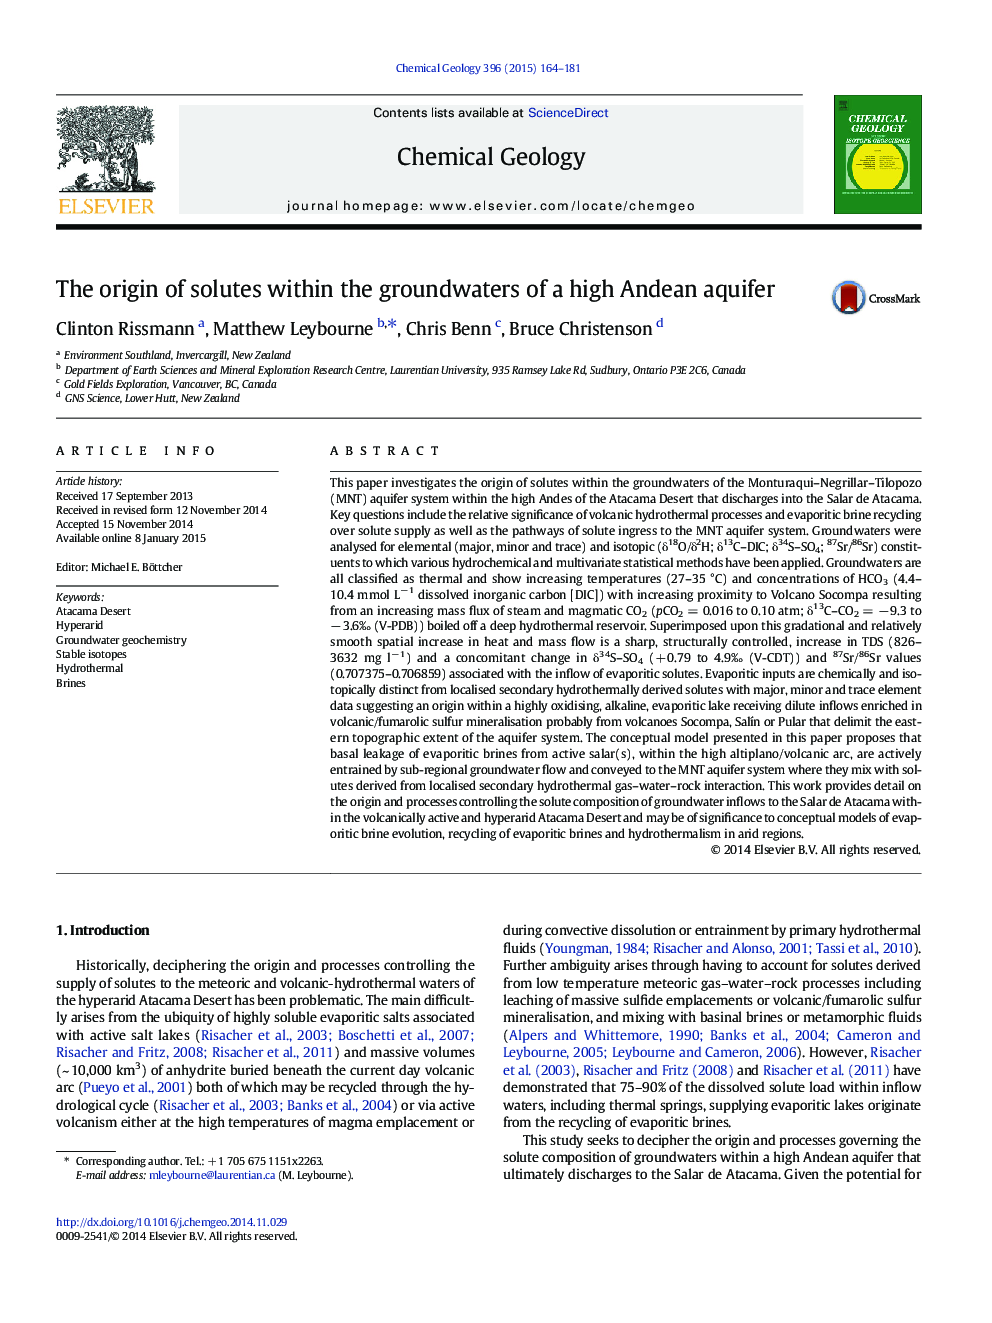 The origin of solutes within the groundwaters of a high Andean aquifer